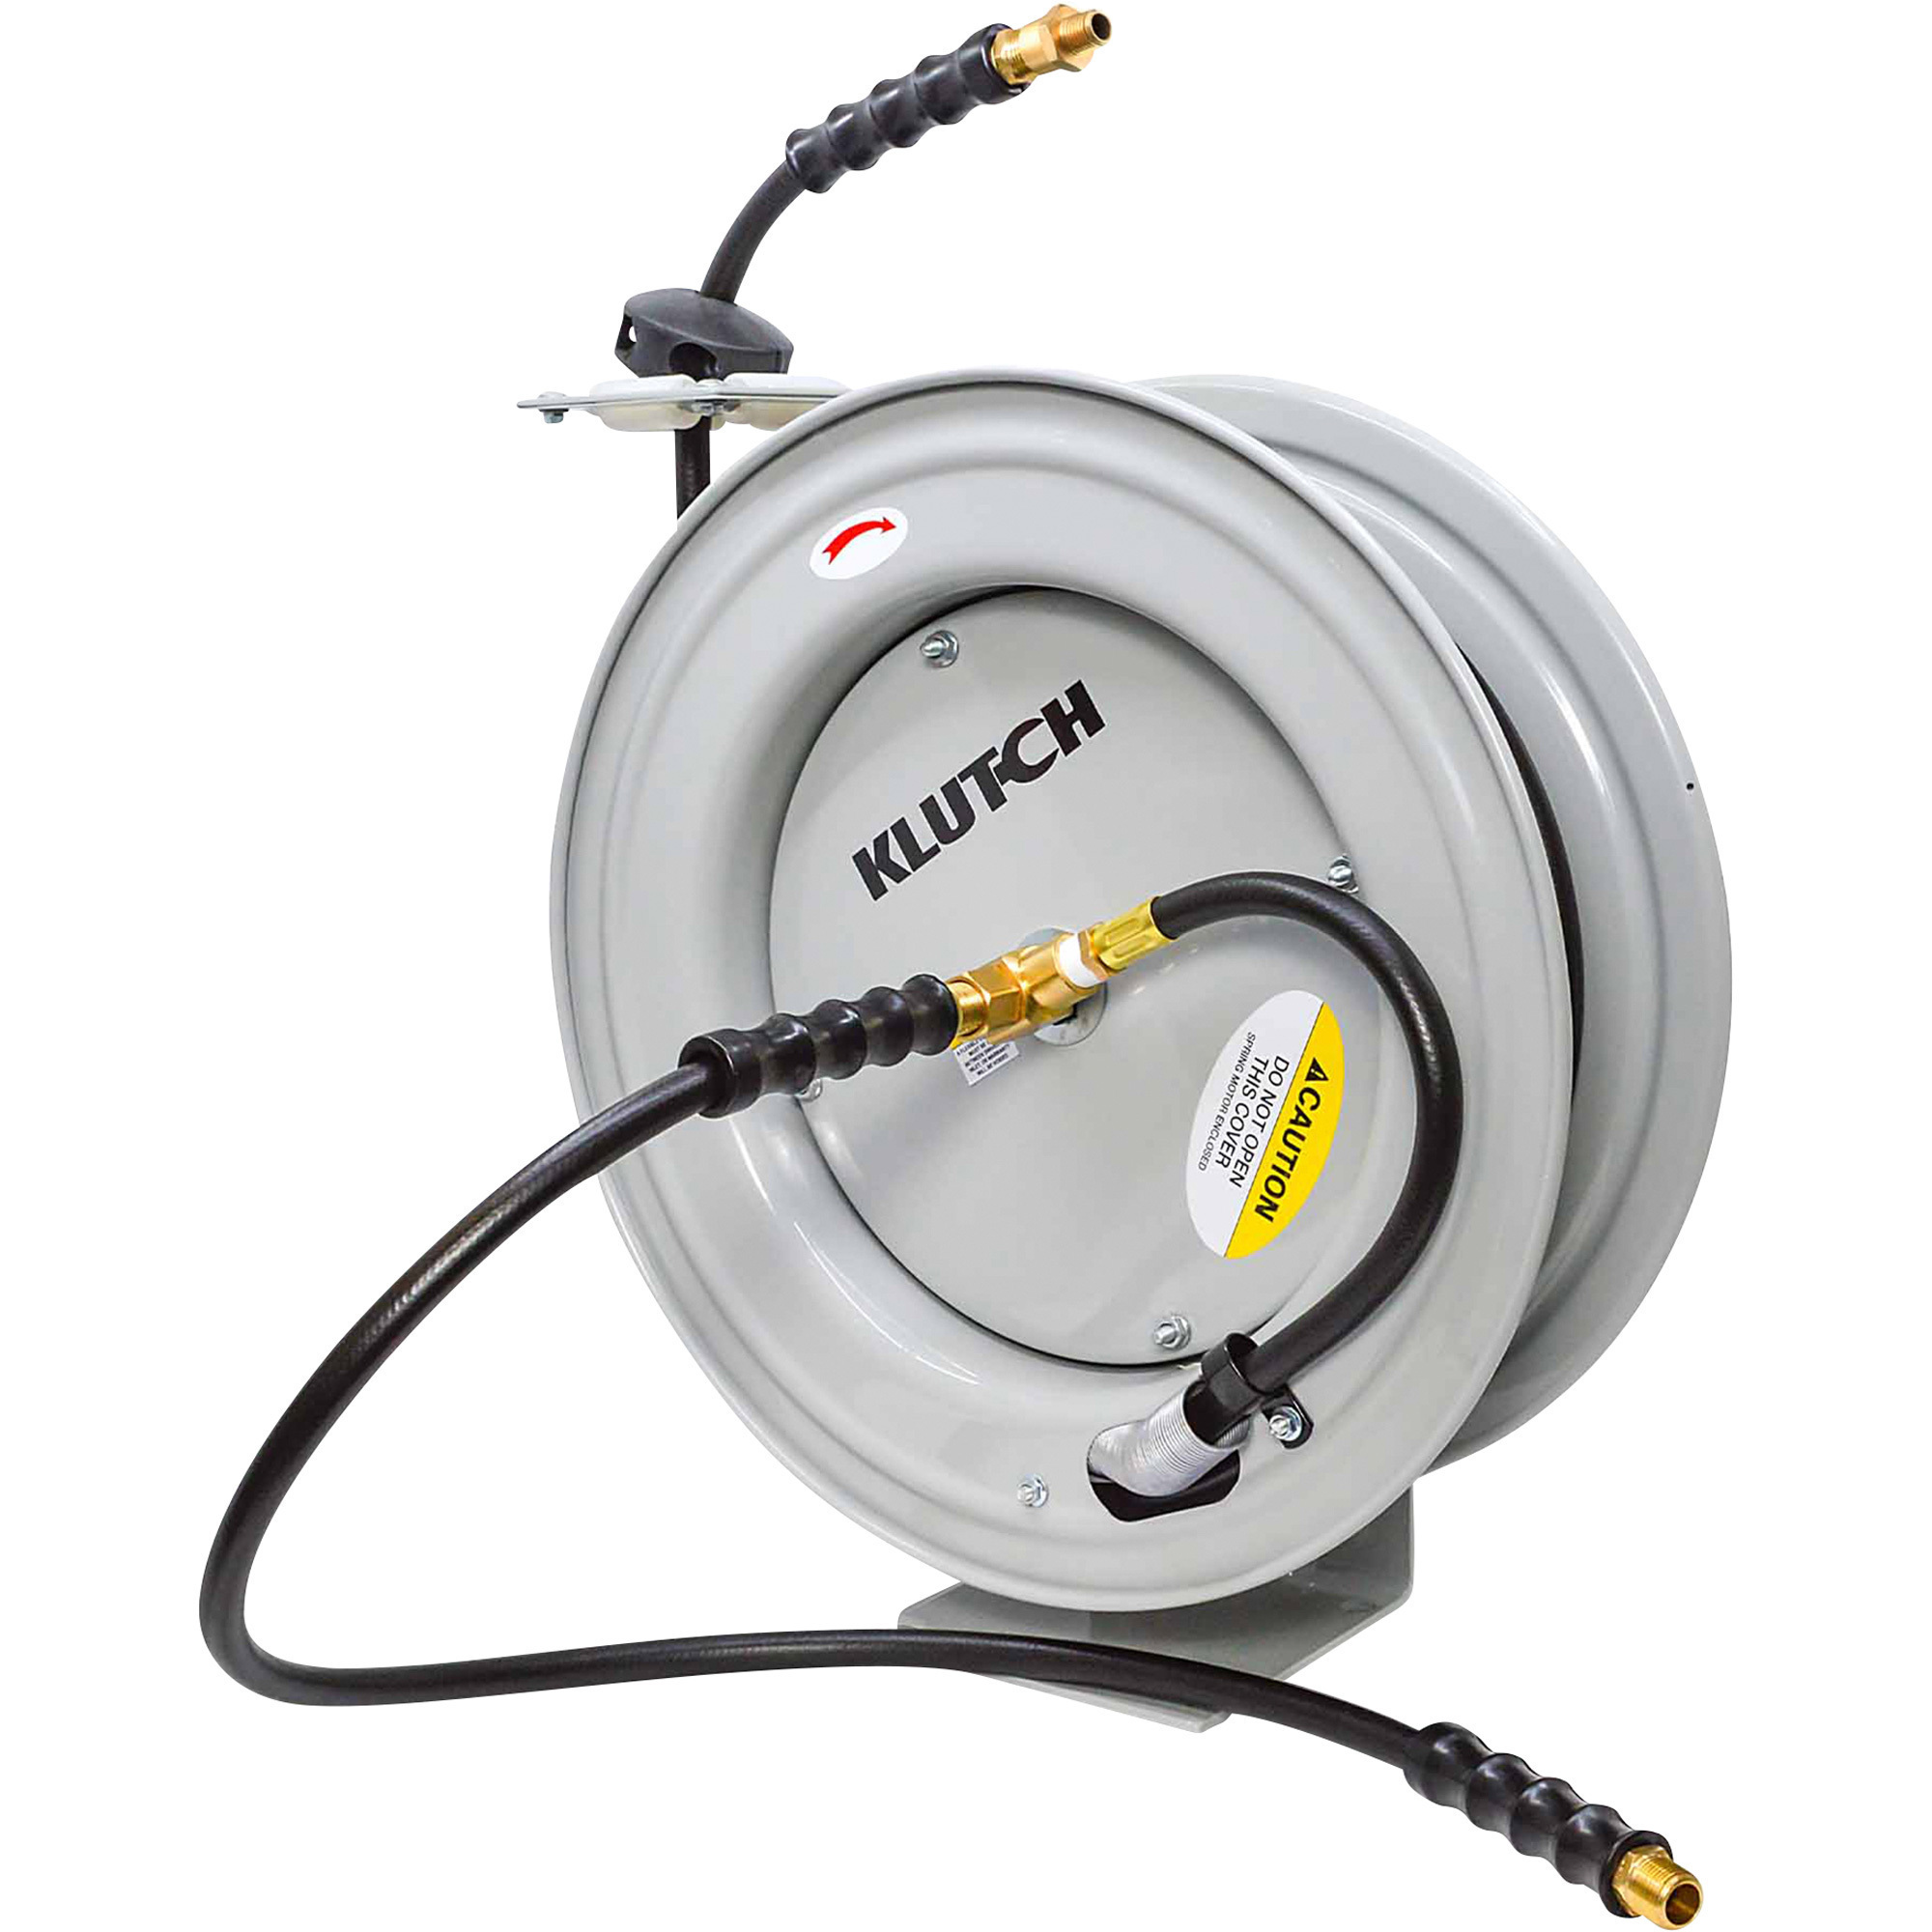 Klutch Auto-Rewind Air Hose Reel, with 3/8in. x 75ft. Rubber Hose